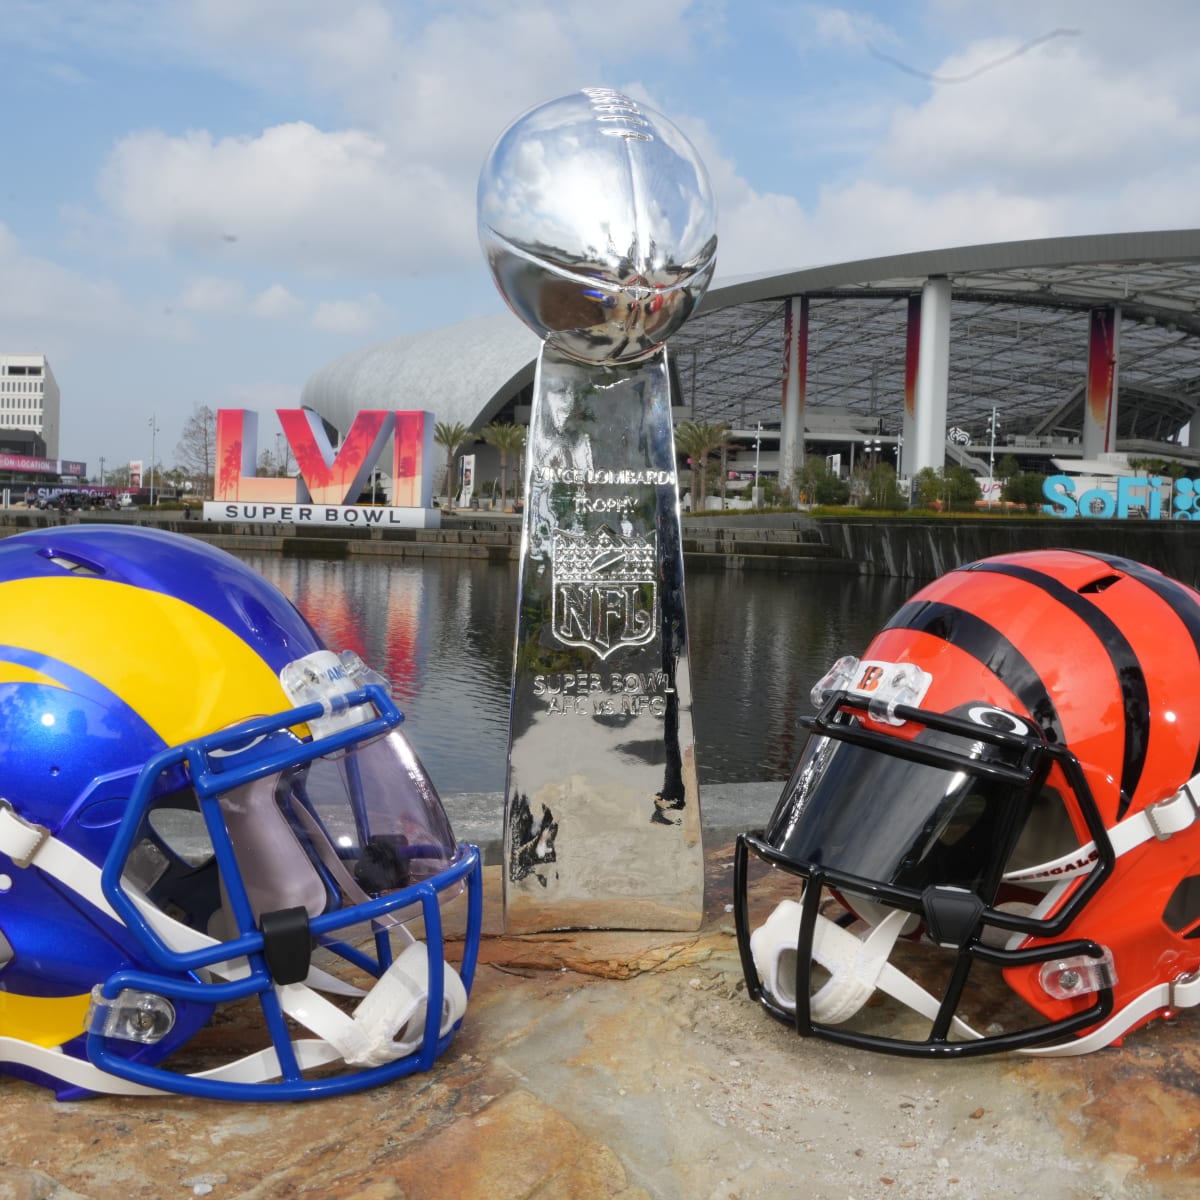 Why the Bengals will be the home team in the Rams' home, SoFi Stadium